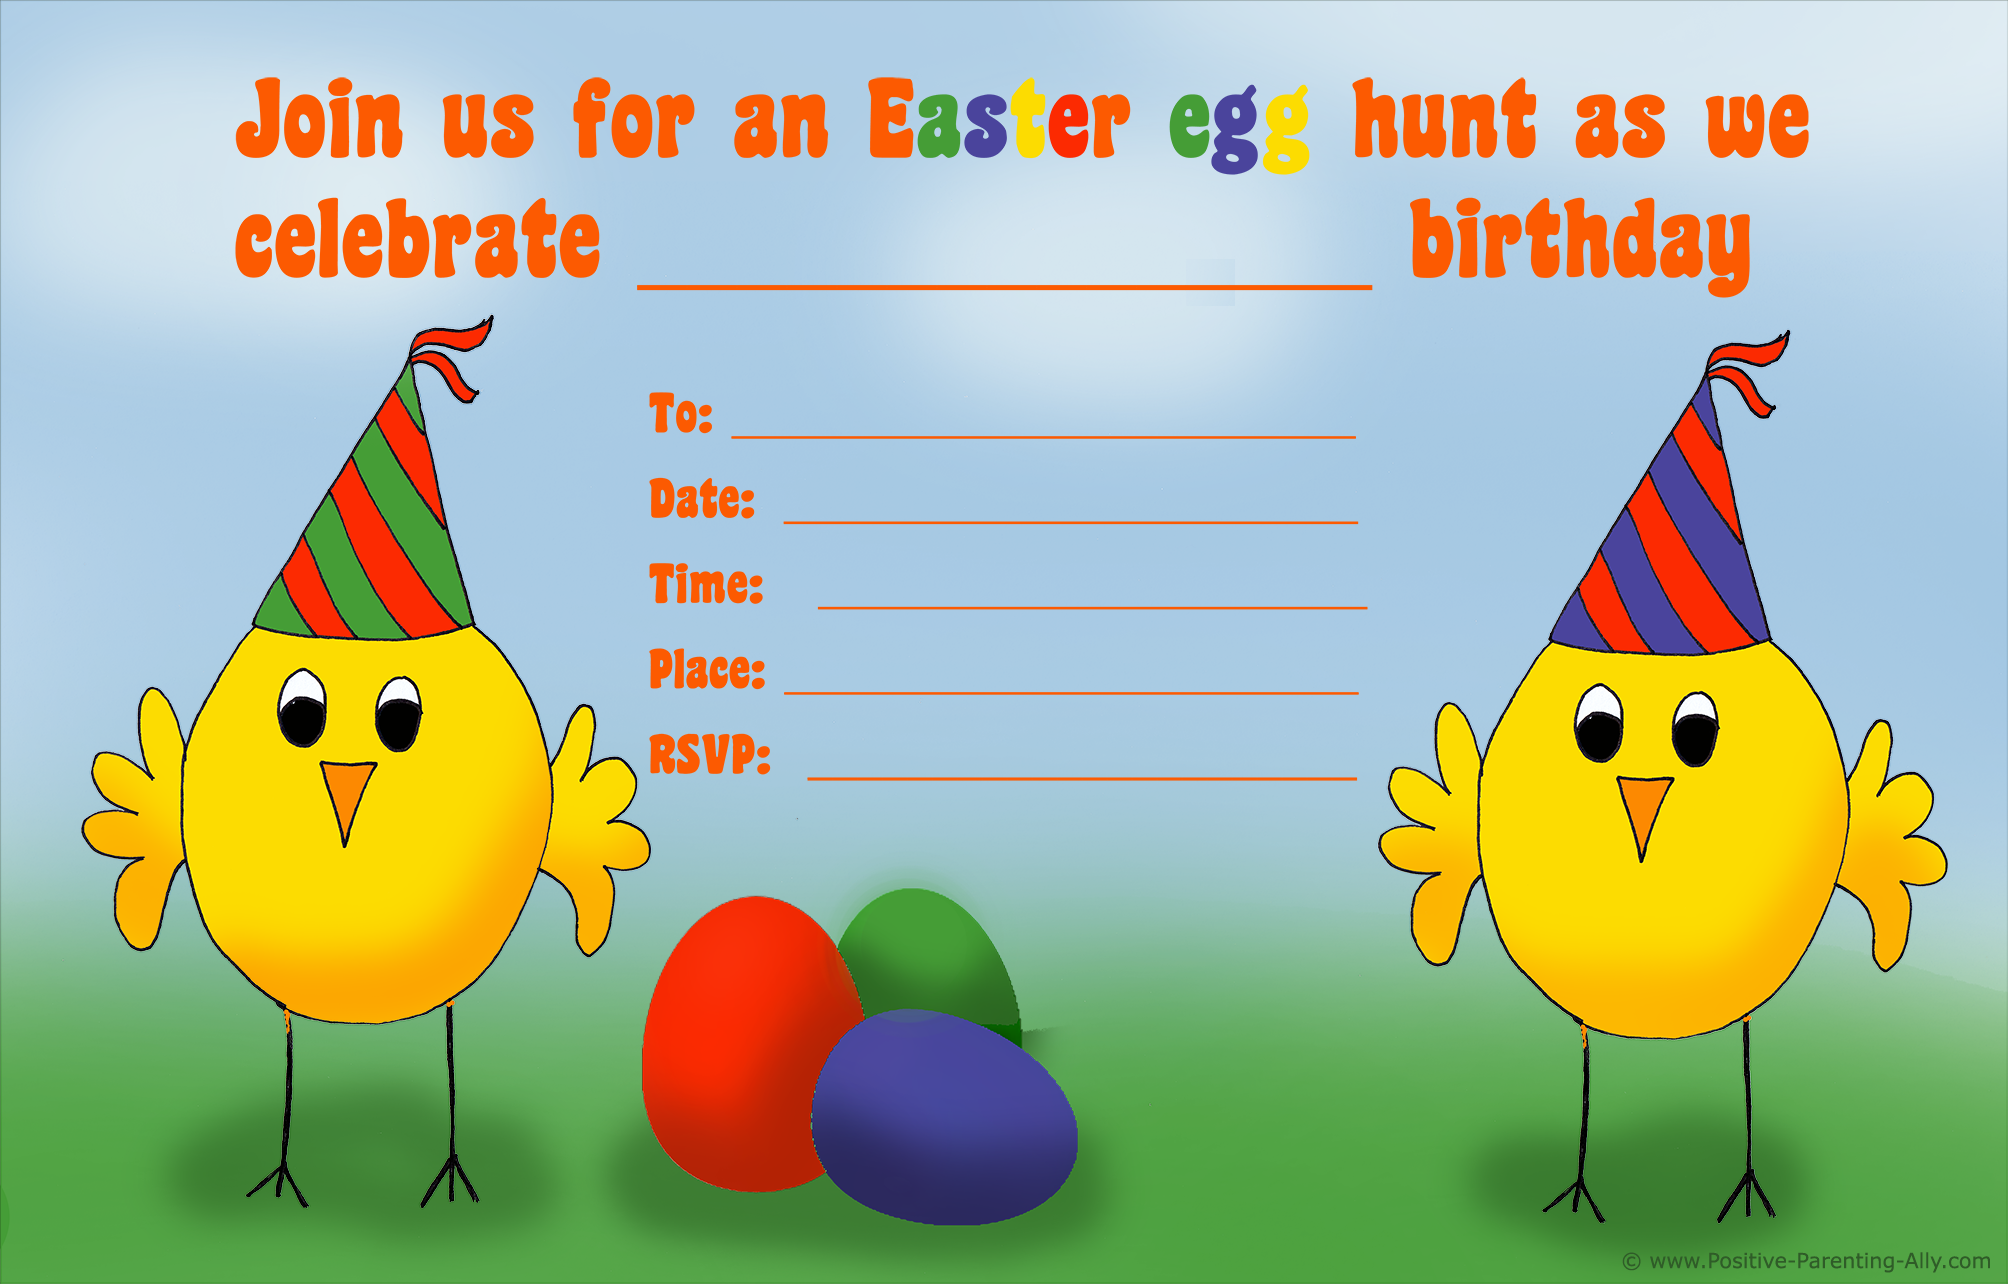 Easter egg hunt birthday invitation with chickens.